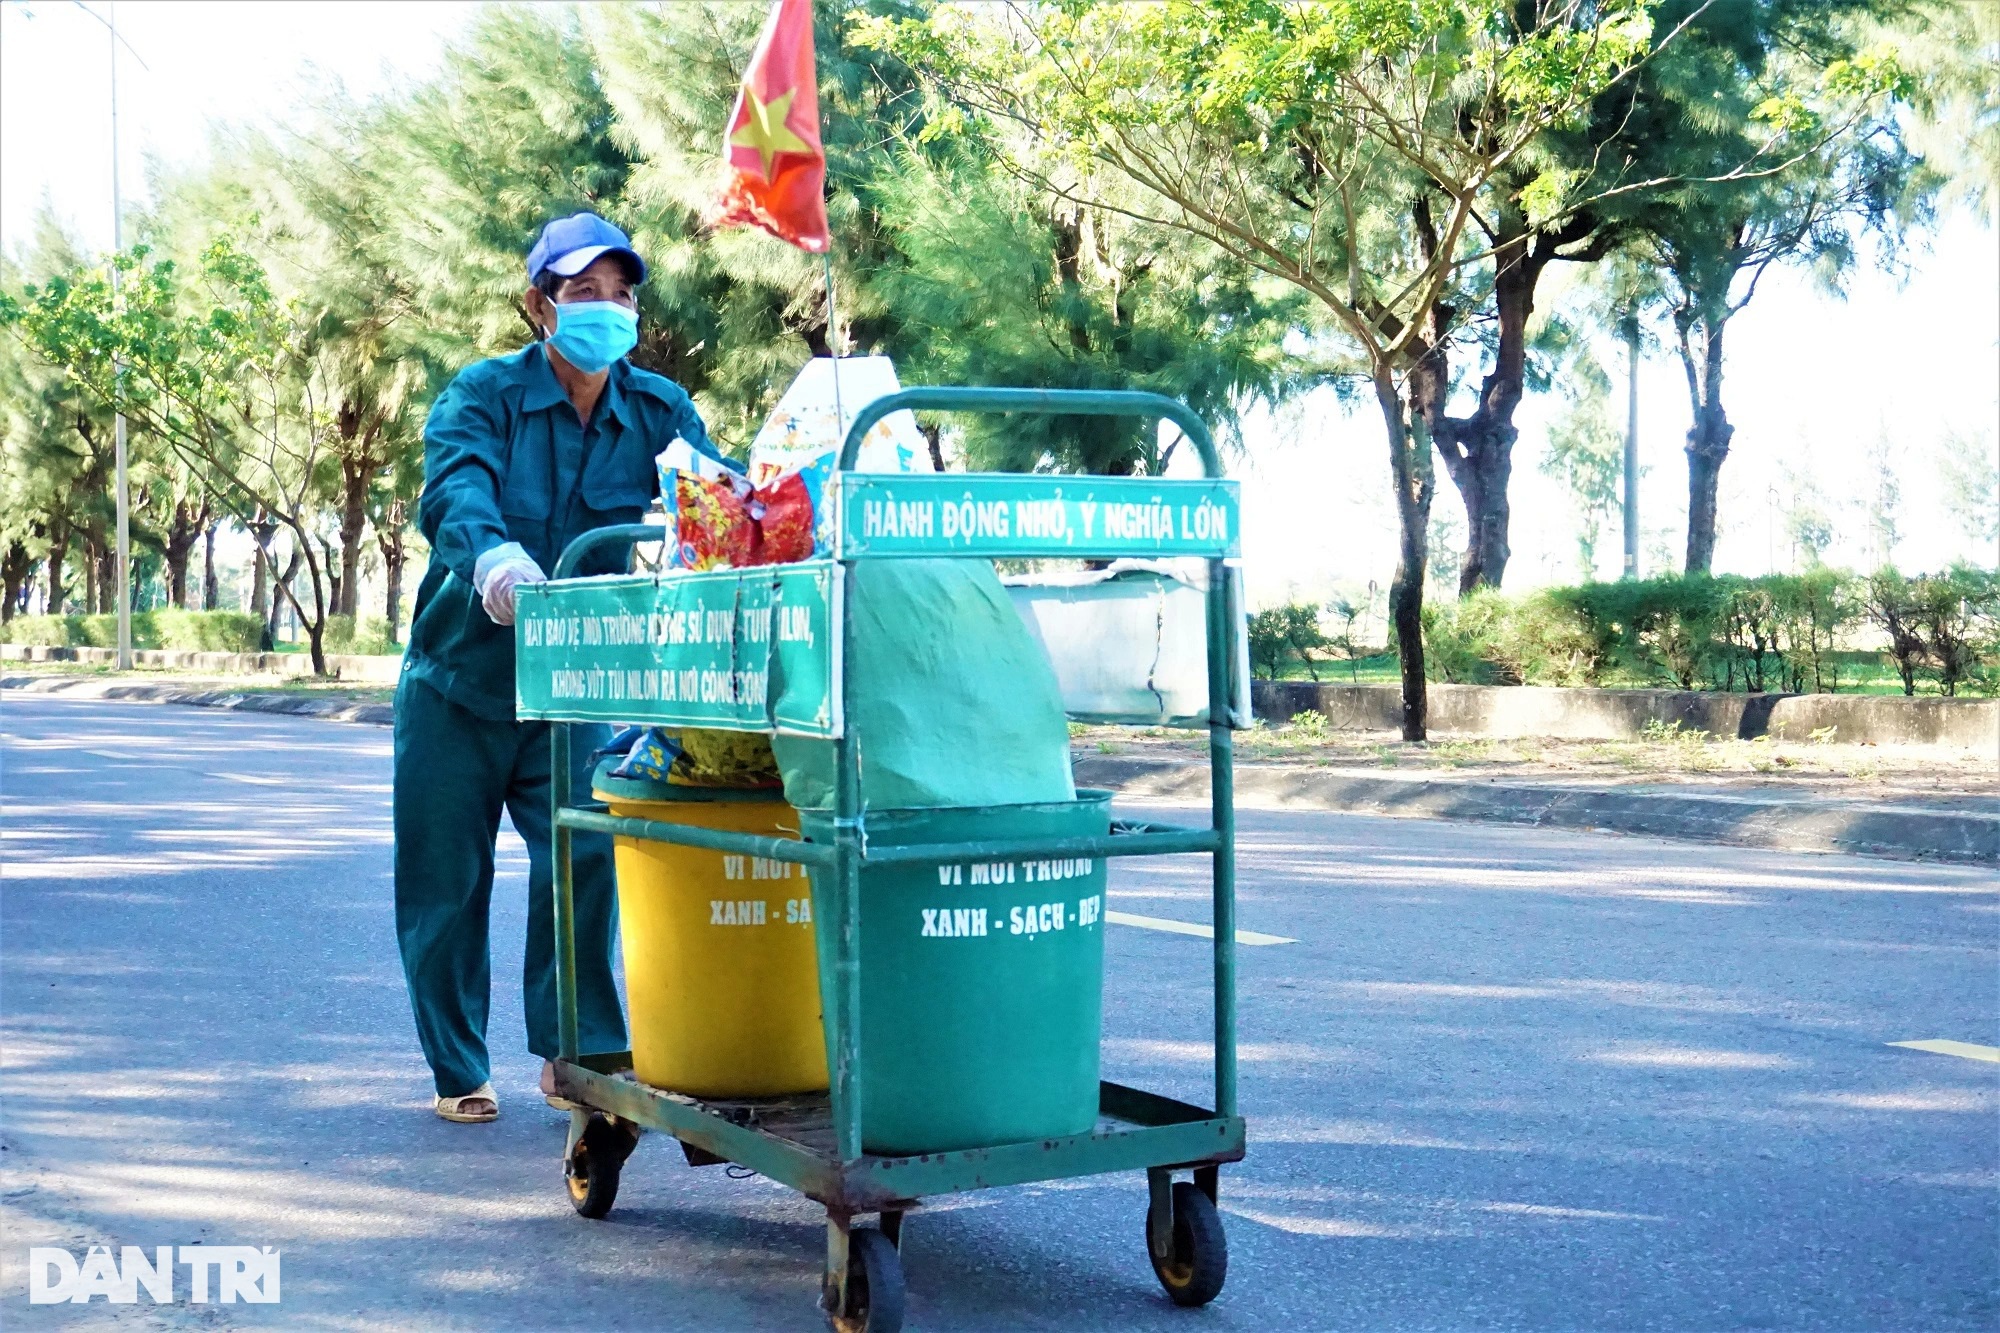 The story of a crazy old man who specializes in picking up trash in Hoi An ancient town - 1